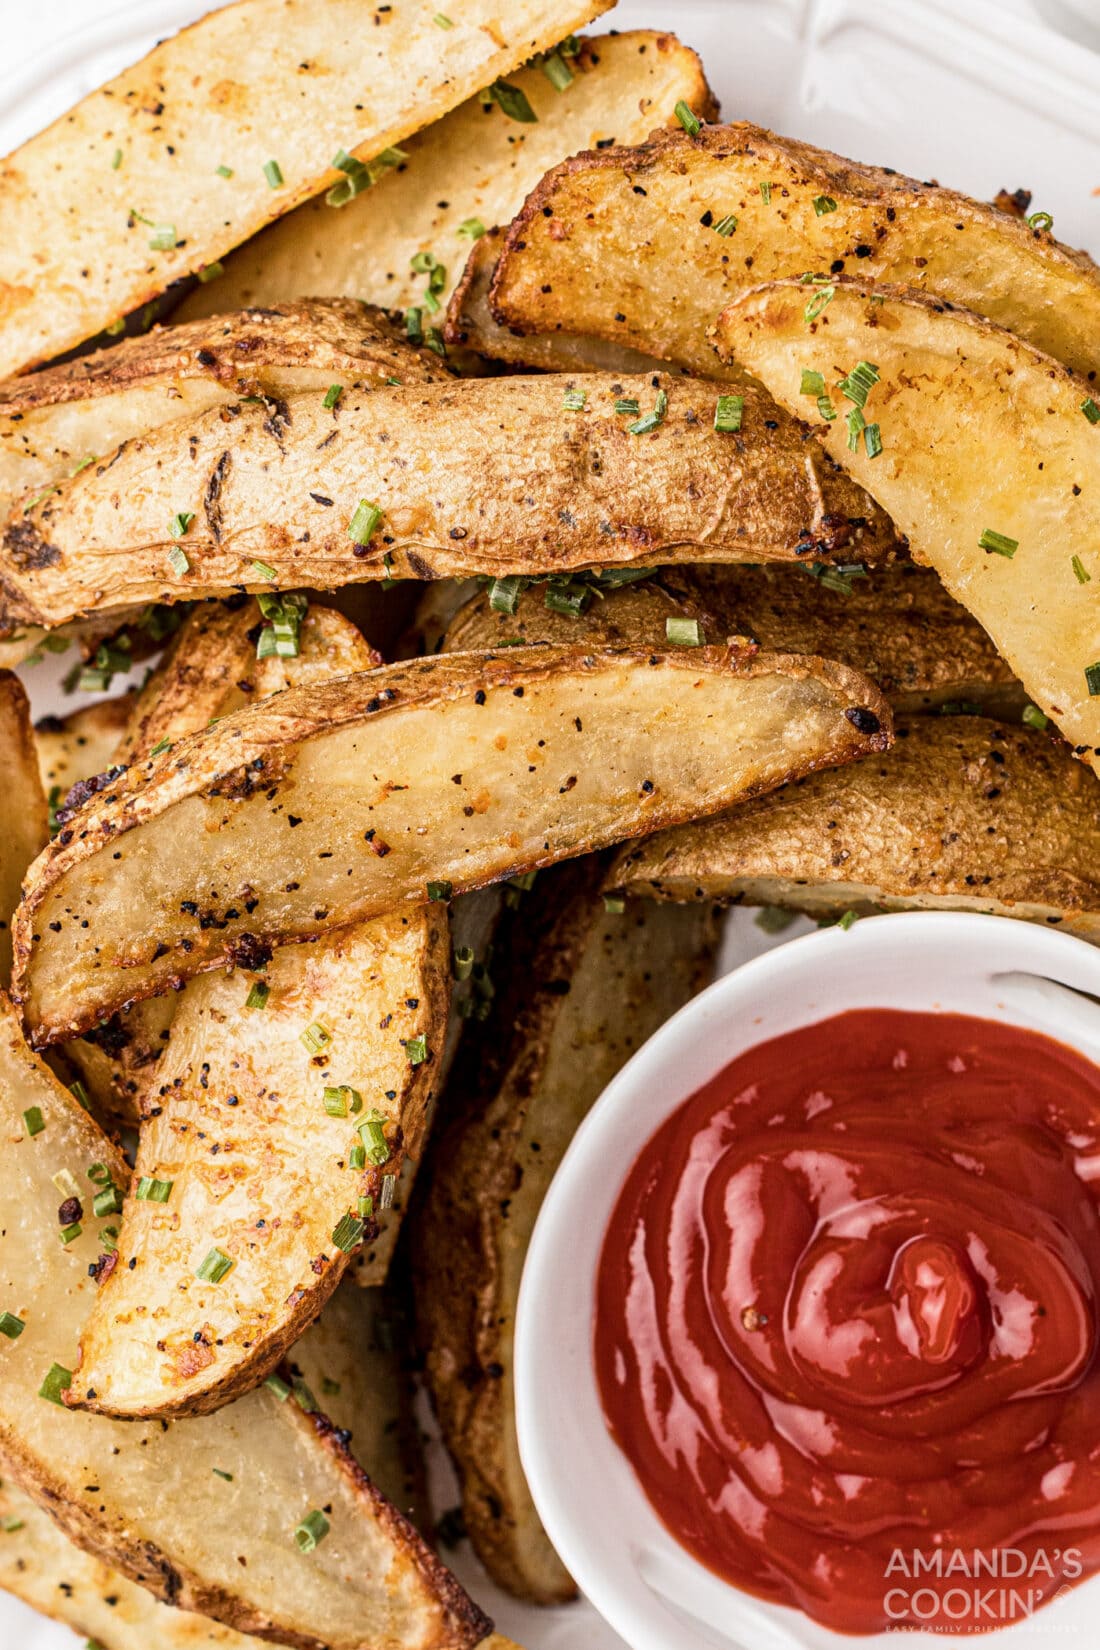 Potato Wedges with ketchup 